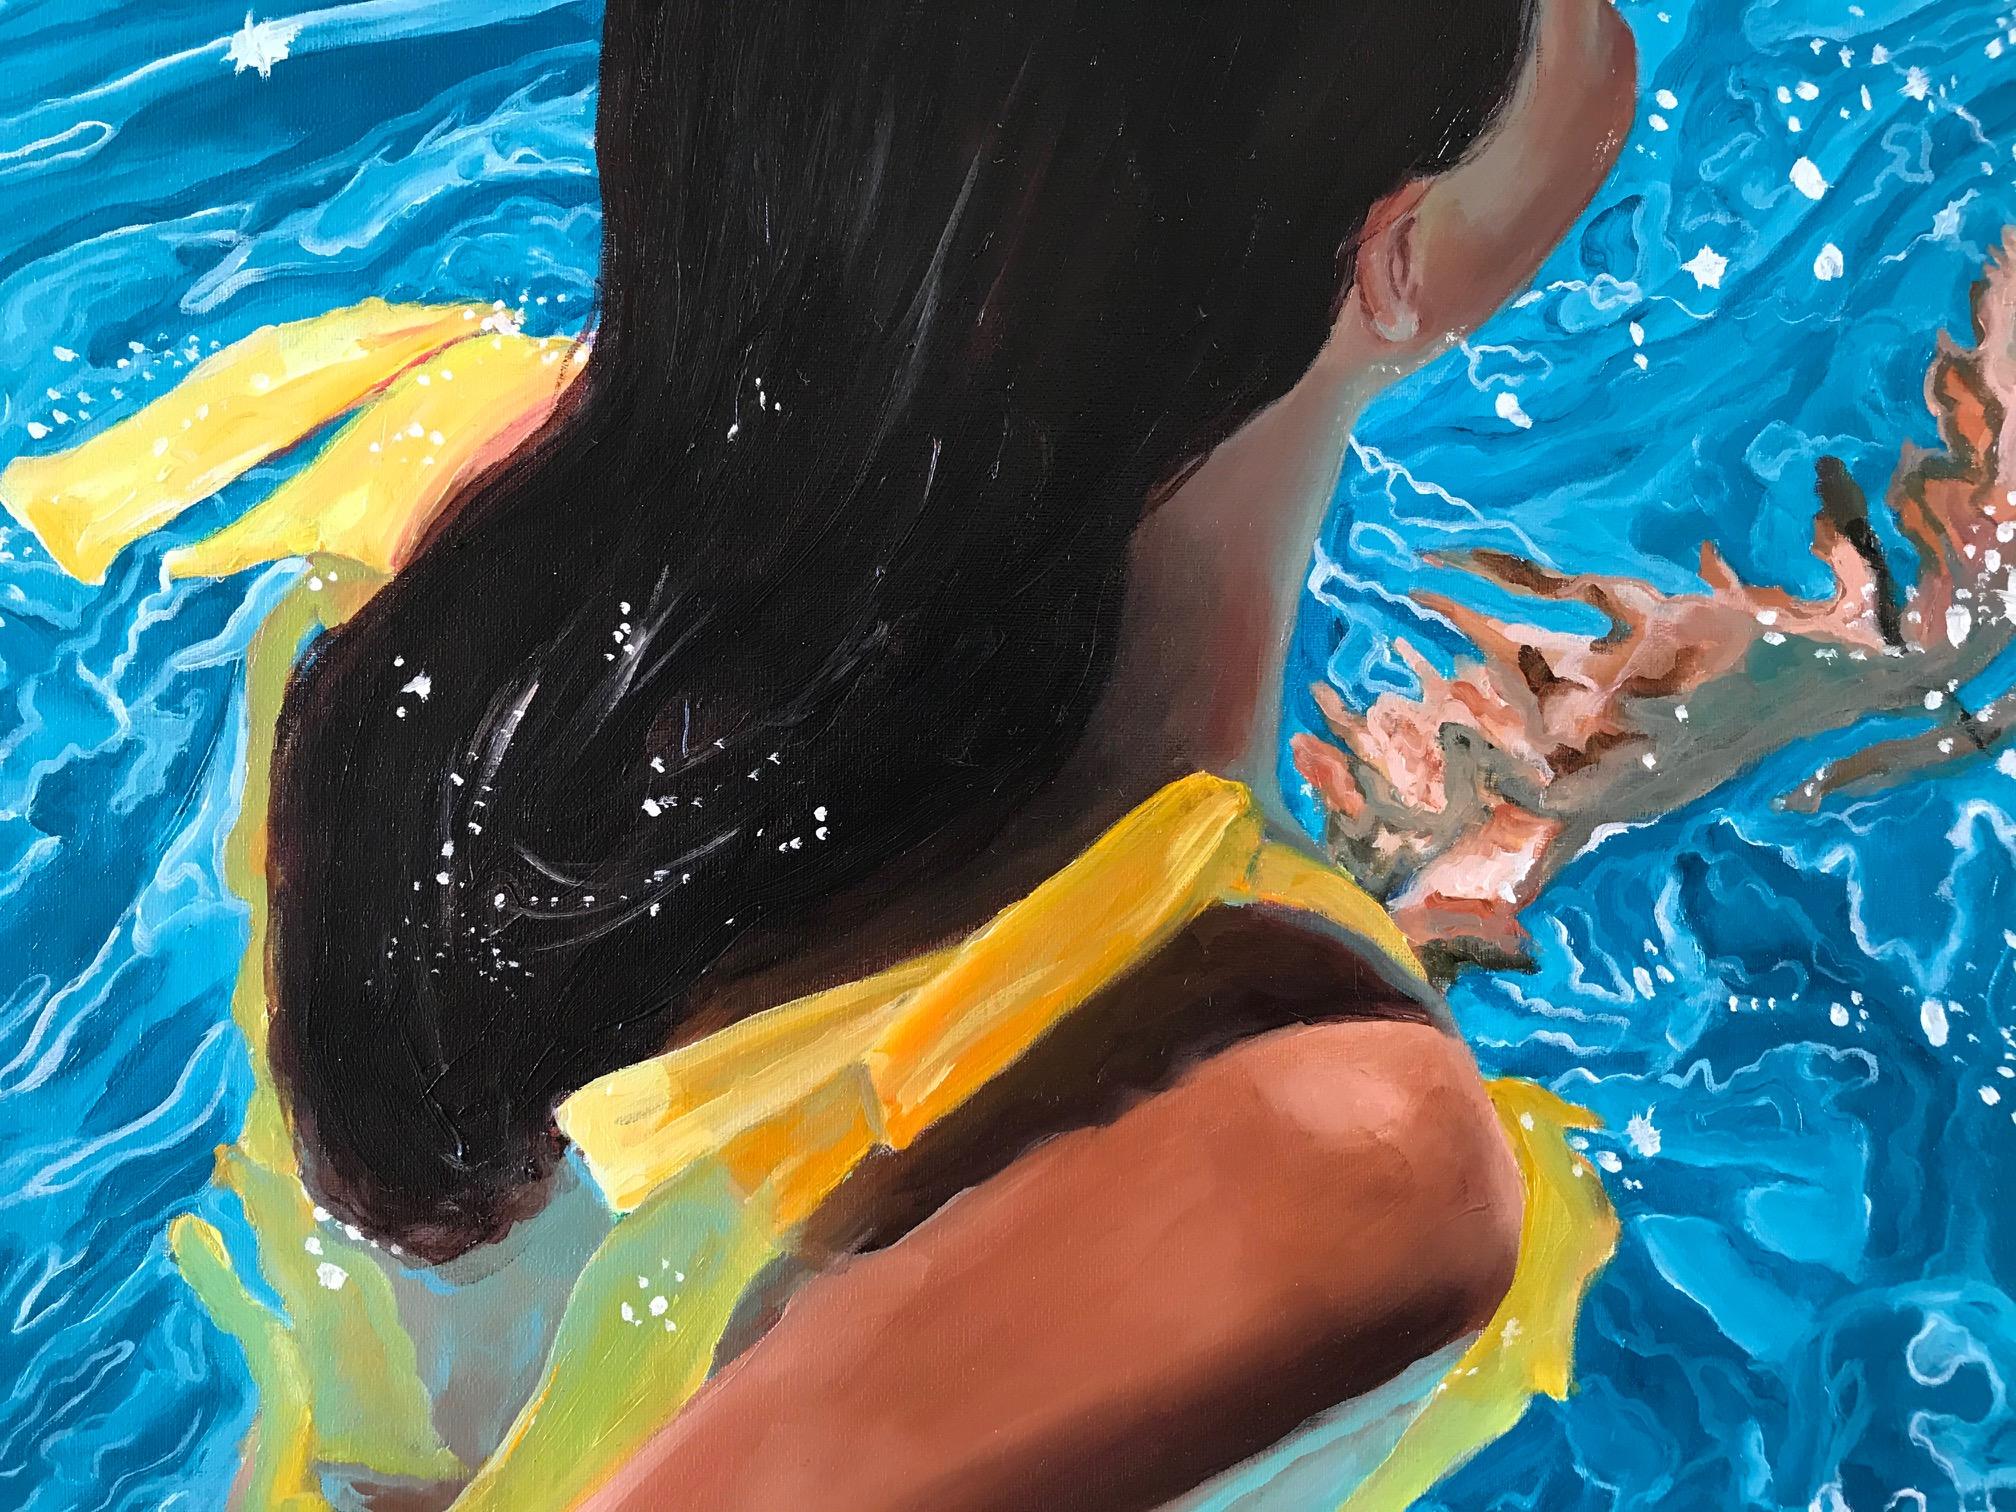 Amy Devlin portrays people, animals, or nature in her works. But what really matters to her is light and water, which she wants to capture in the form of a physical memory. By following her passion for paint, she tries to represent reality and